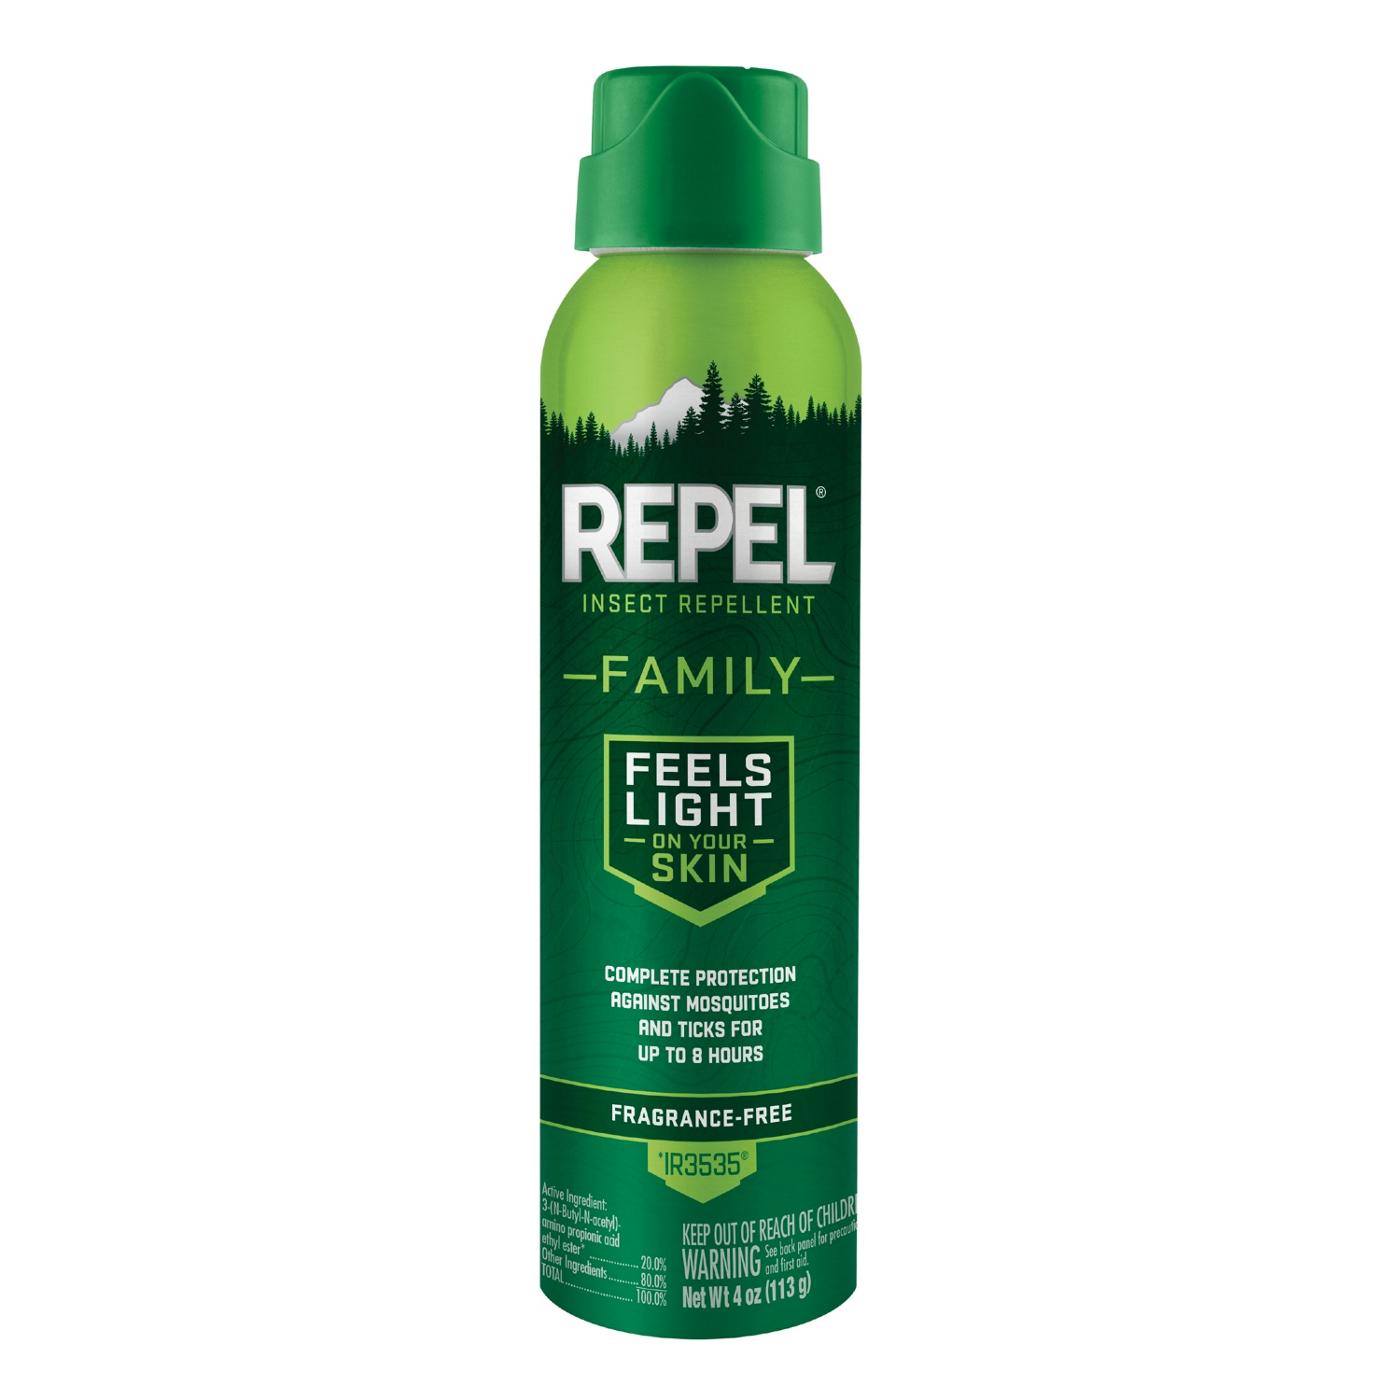 Repel Family Insect Repellent Spray; image 1 of 2